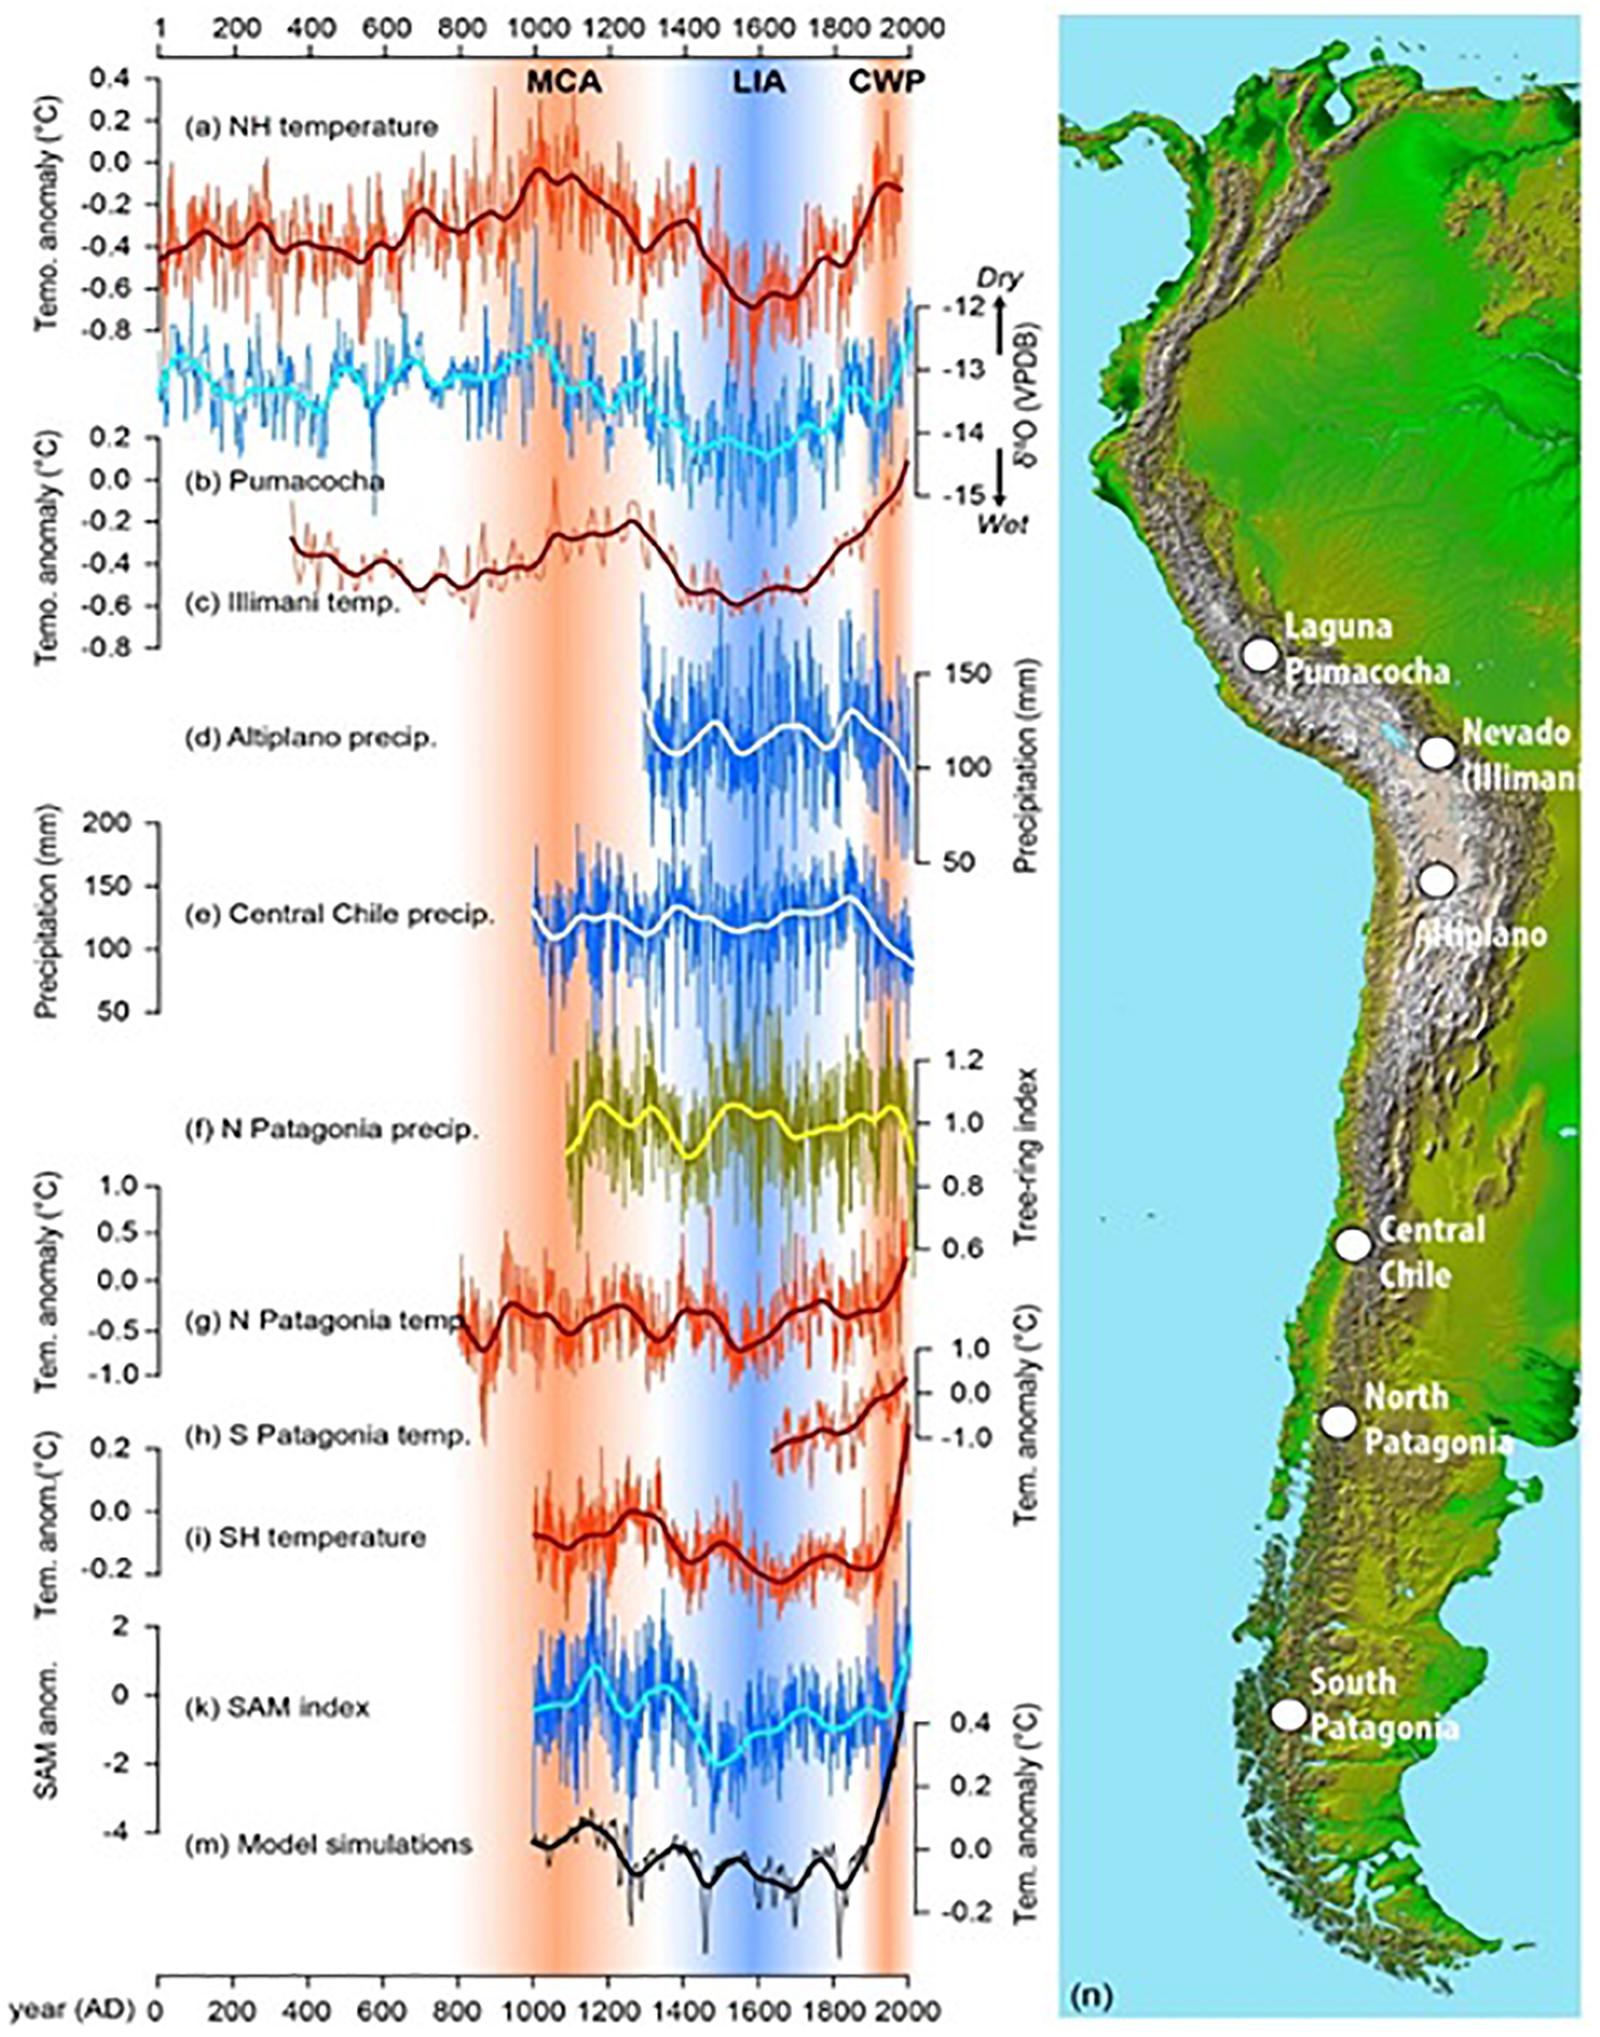 ARGENTINA AND CHILE: Average temperatures in summer and winter